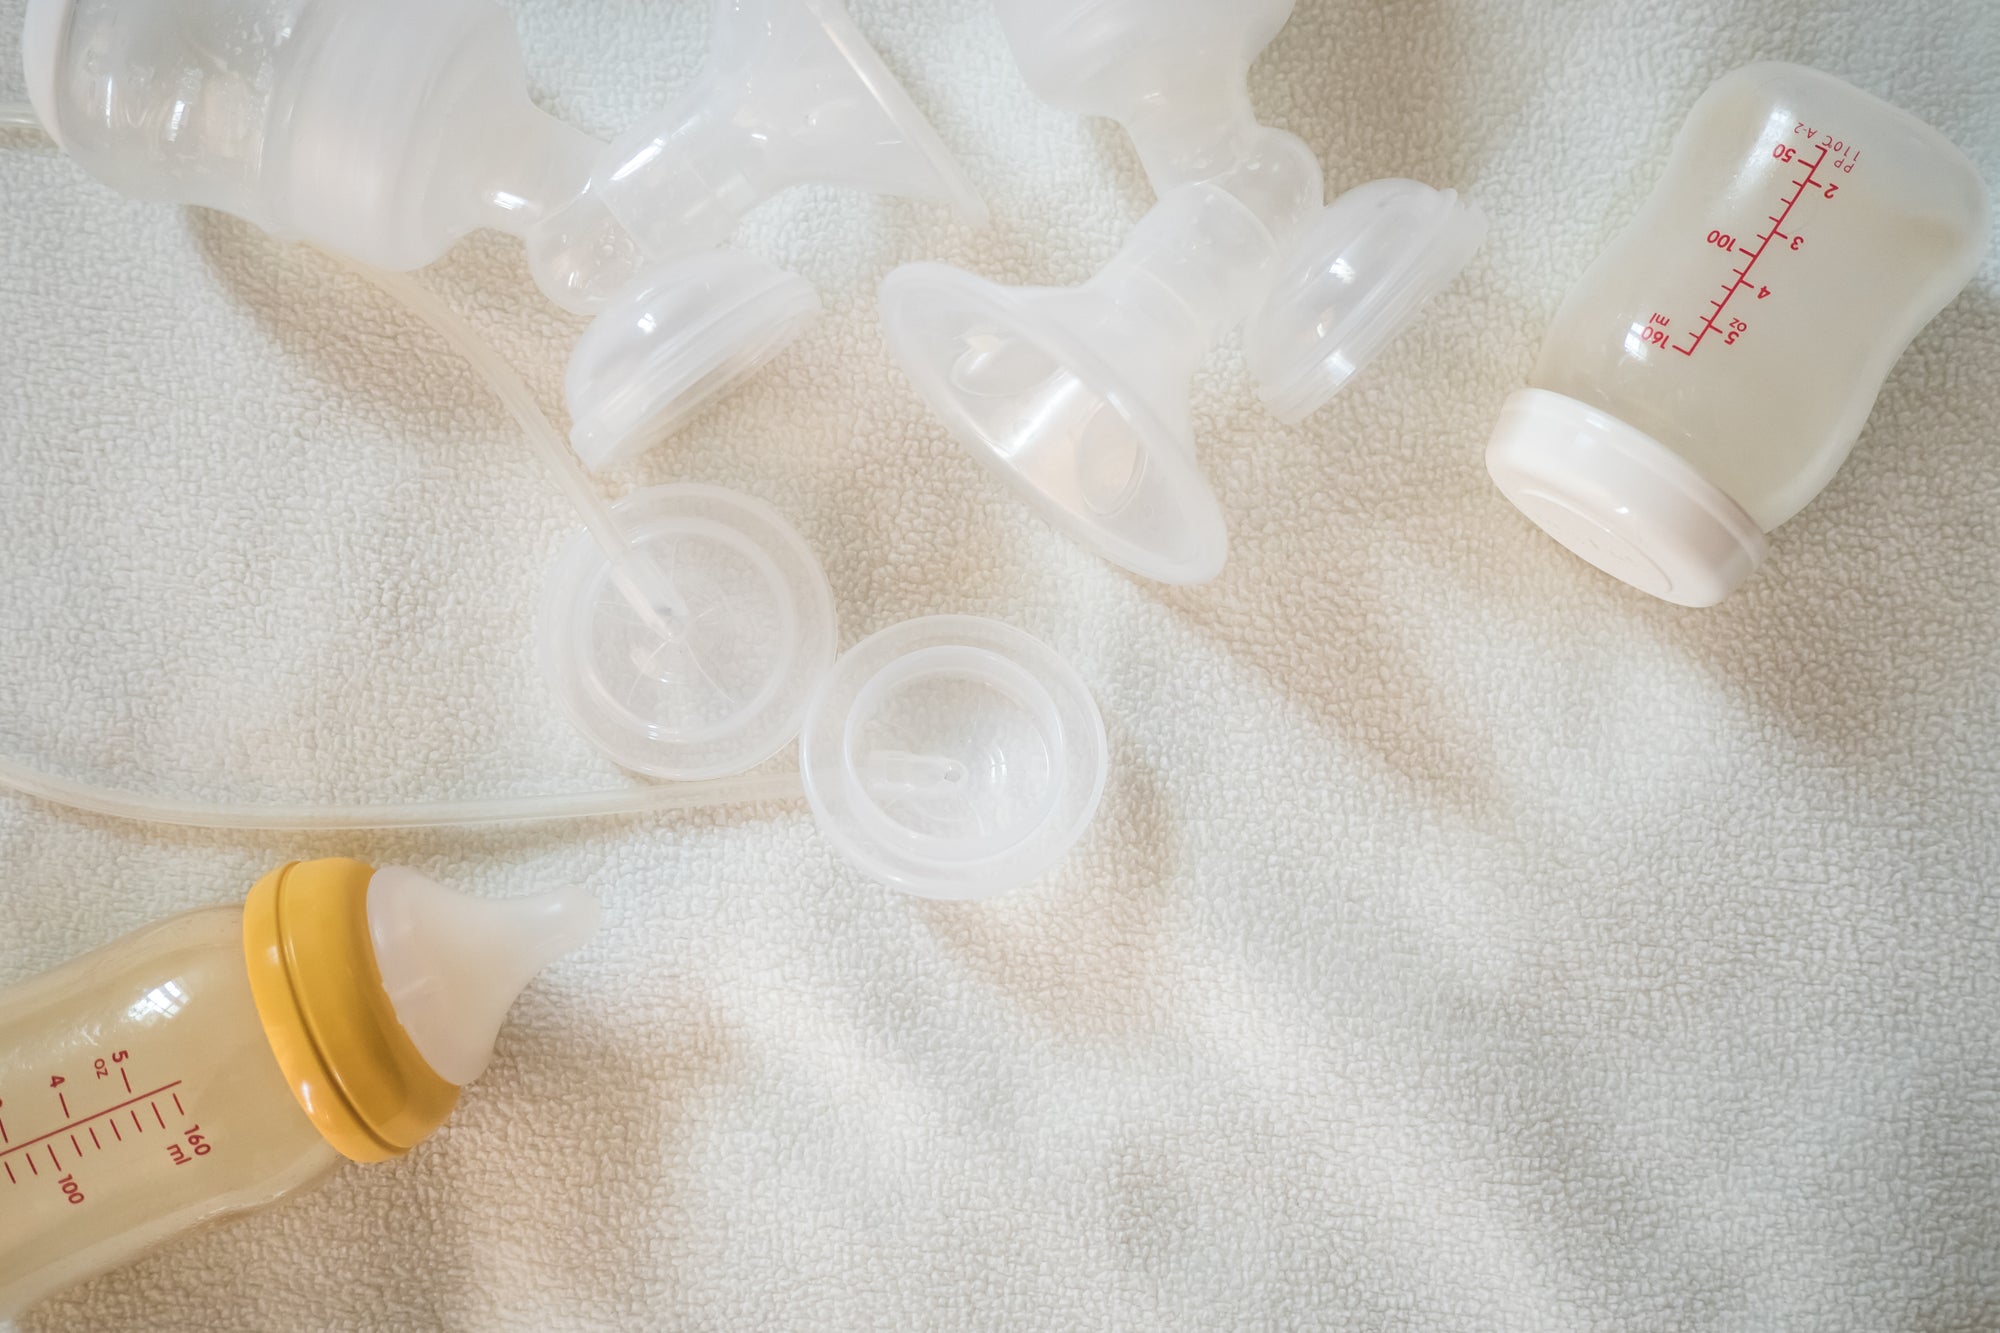 Why Does My Breast Milk Change Color?